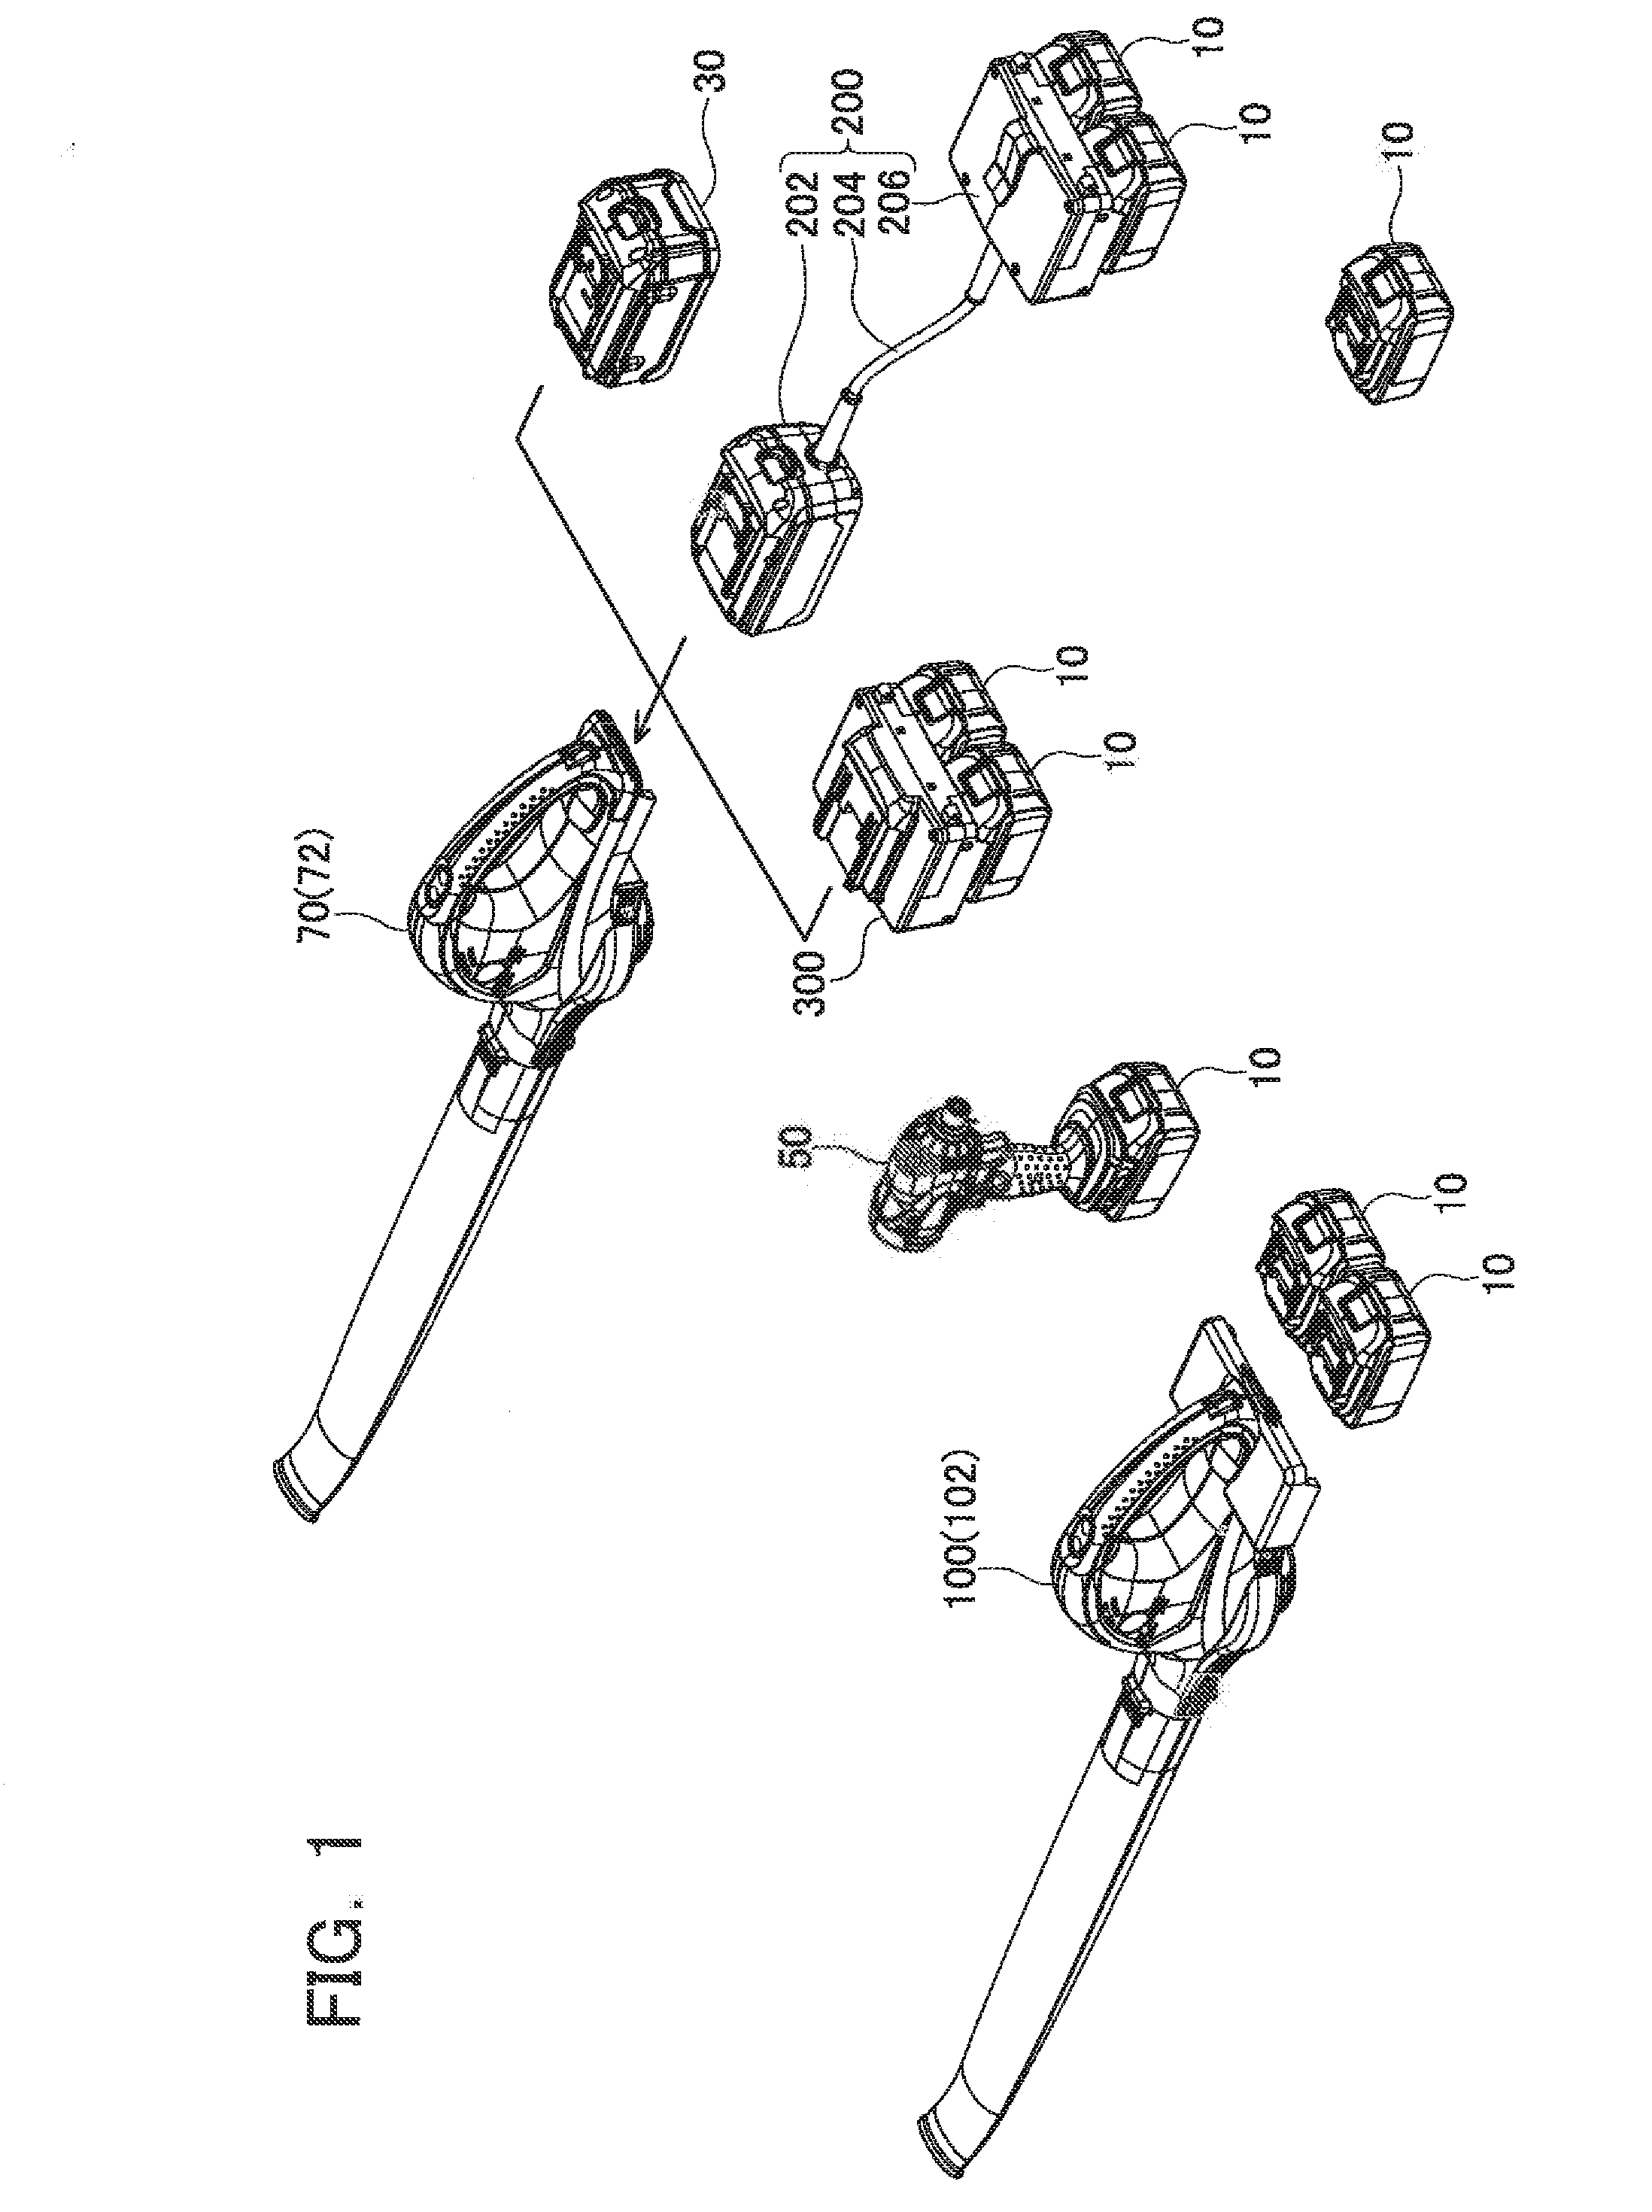 Electric tool powered by a plurality of battery packs and adapter therefor